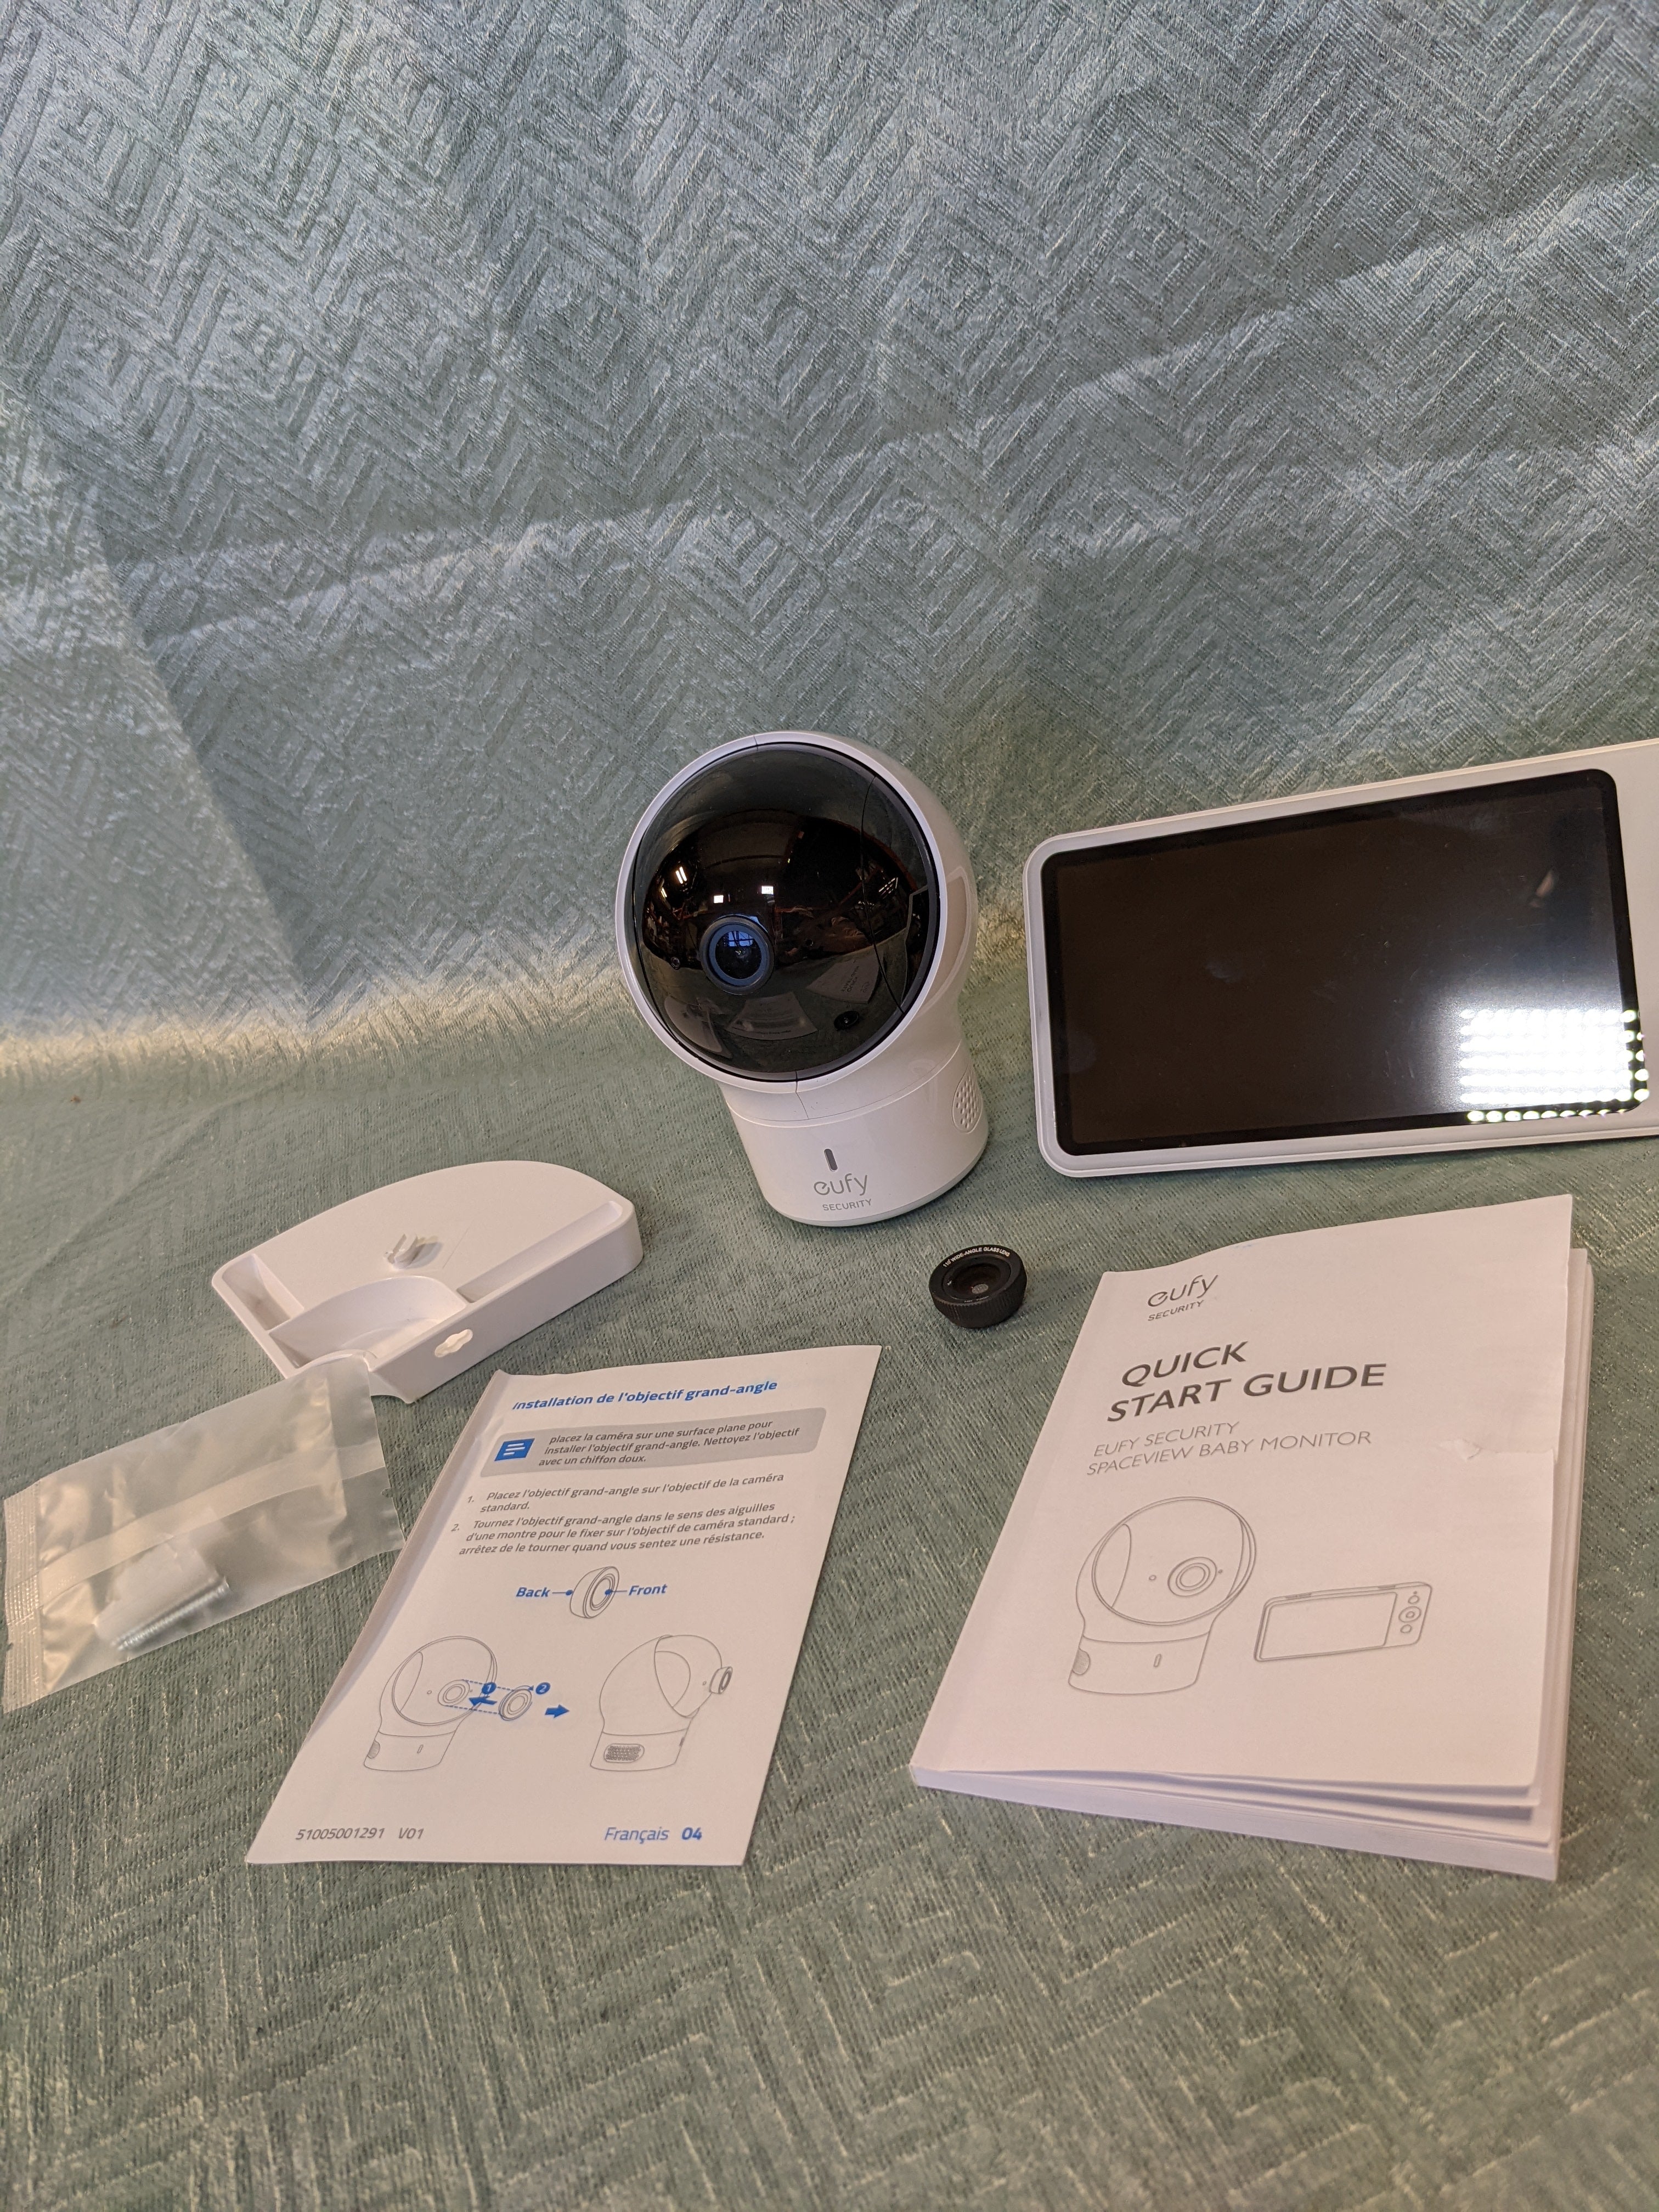 eufy Security, SpaceView Pro 720p Video Baby Monitor with 5’’ Screen FOR PARTS (7528060715246)